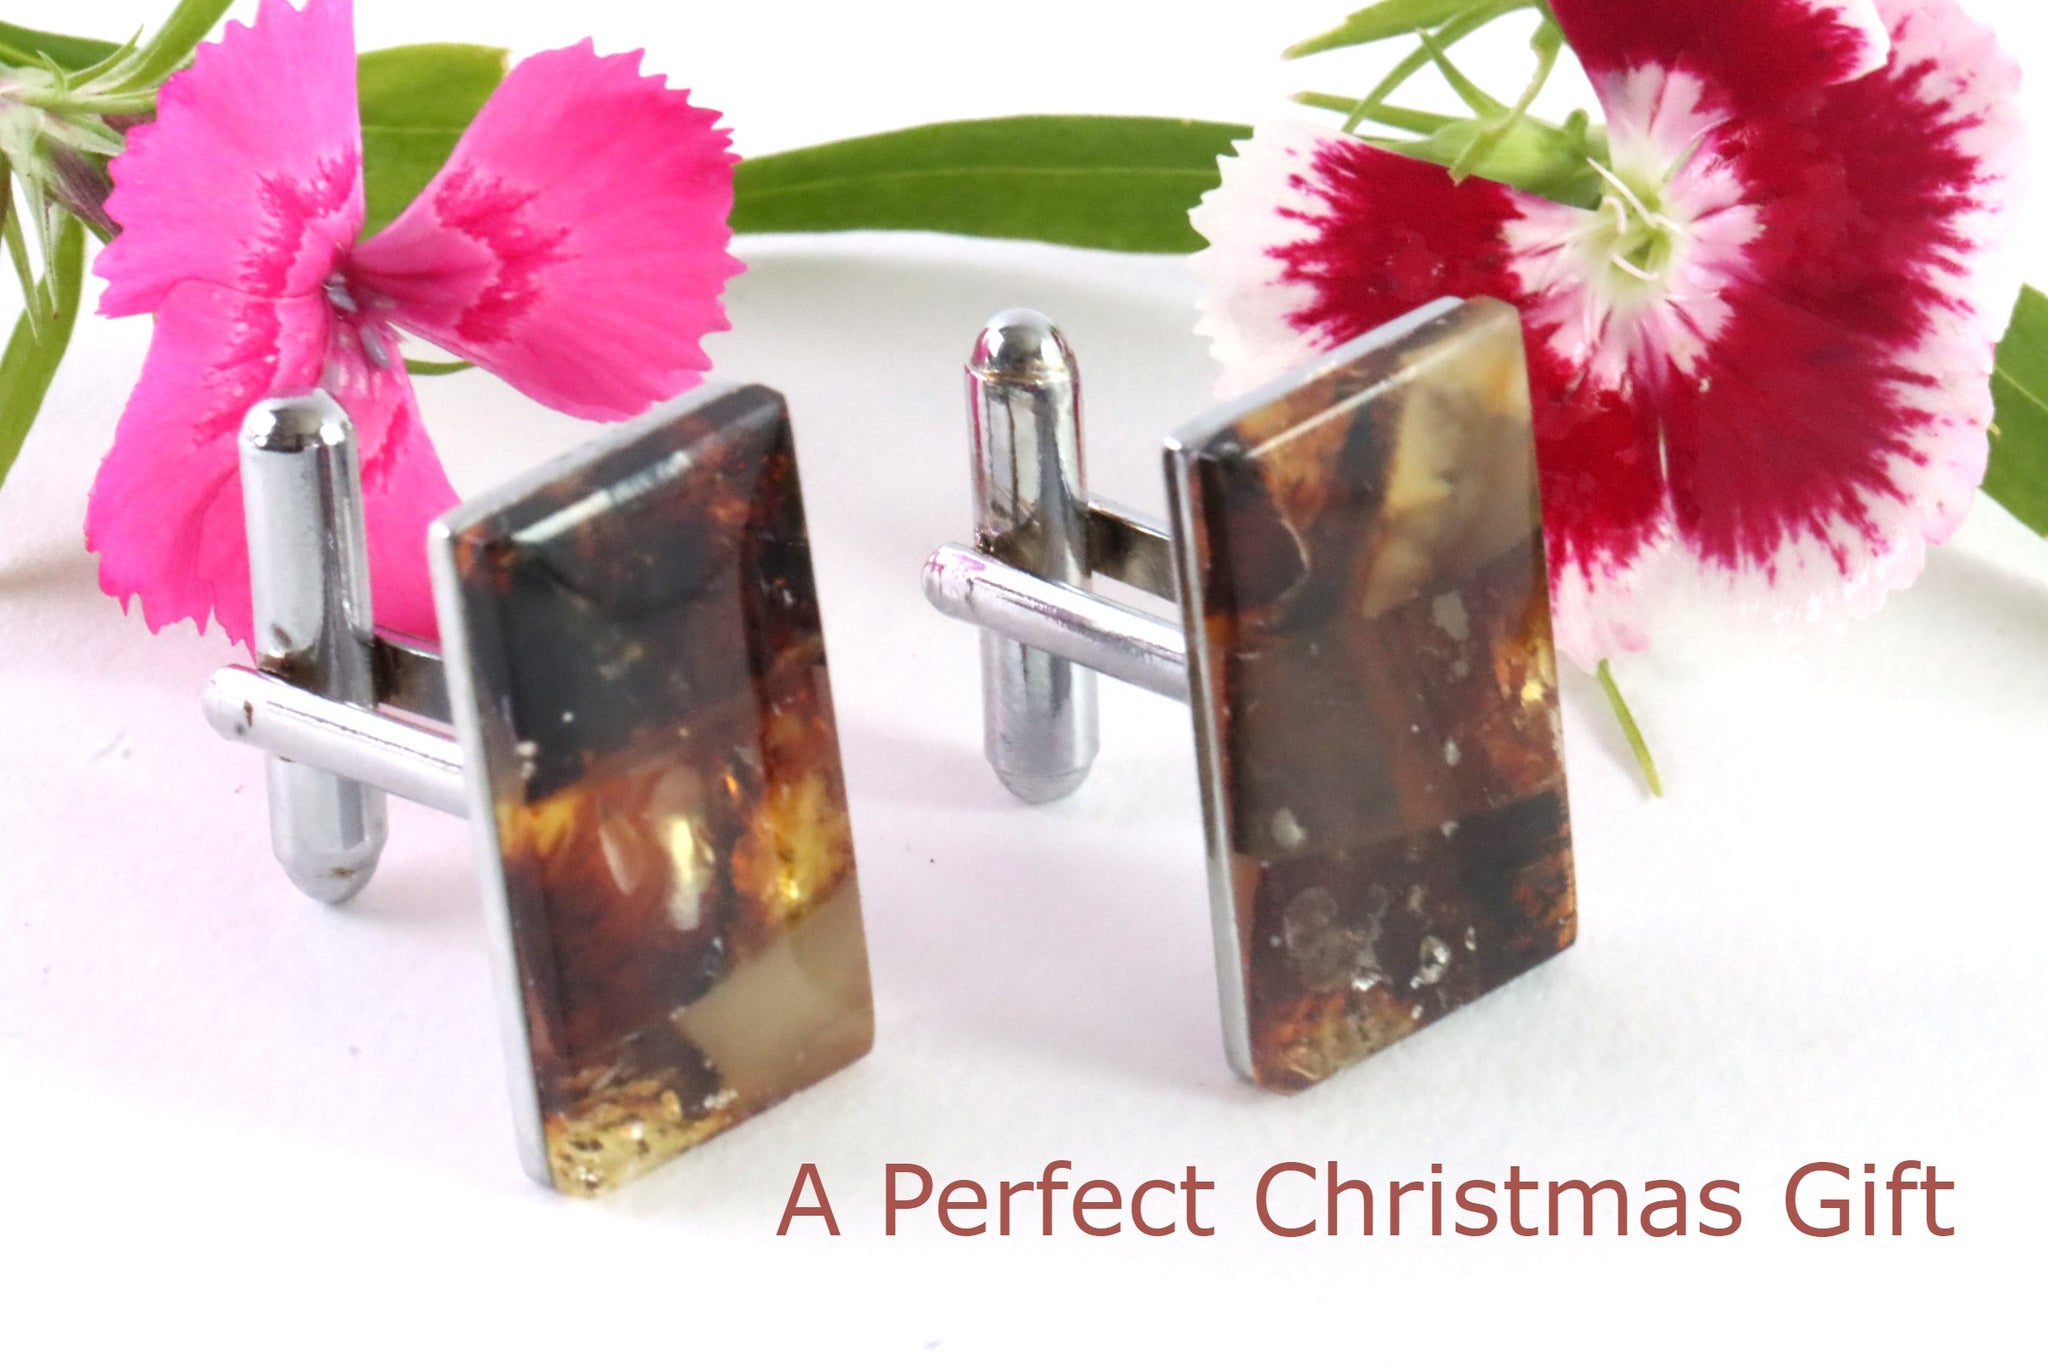 Exclusive Baltic Amber cuff links.